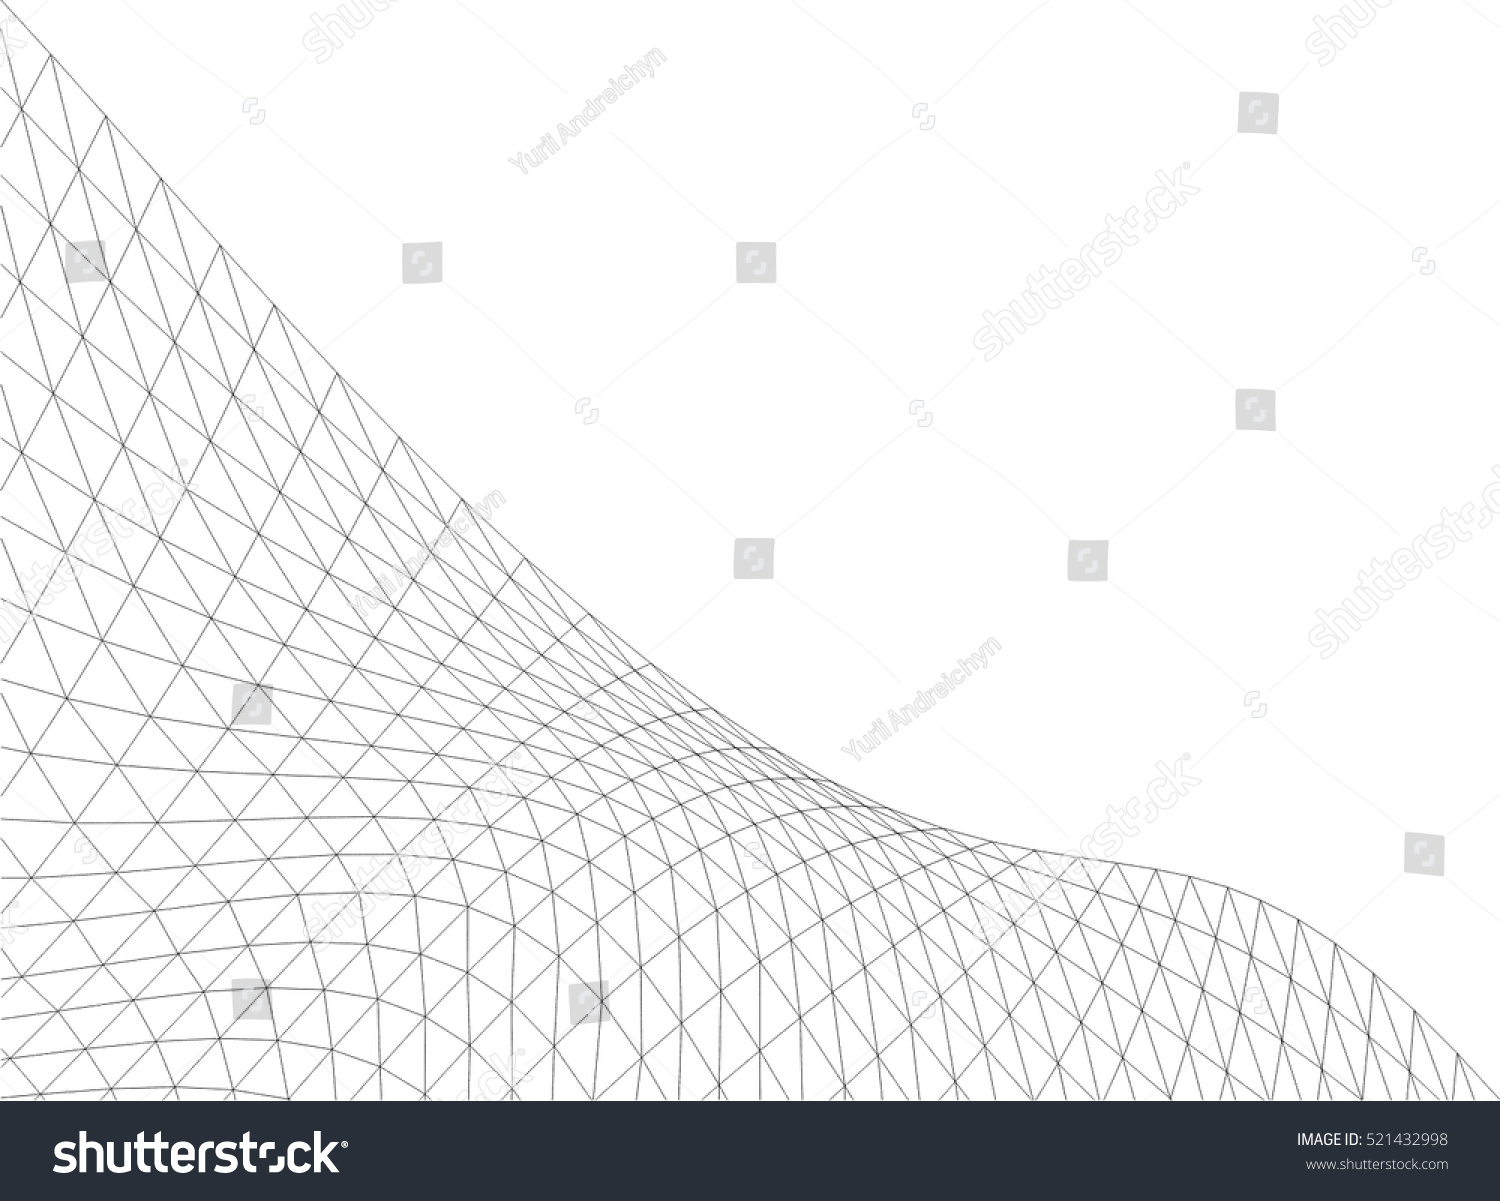 Architectural Drawing Geometric Background Stock Vector (Royalty Free ...